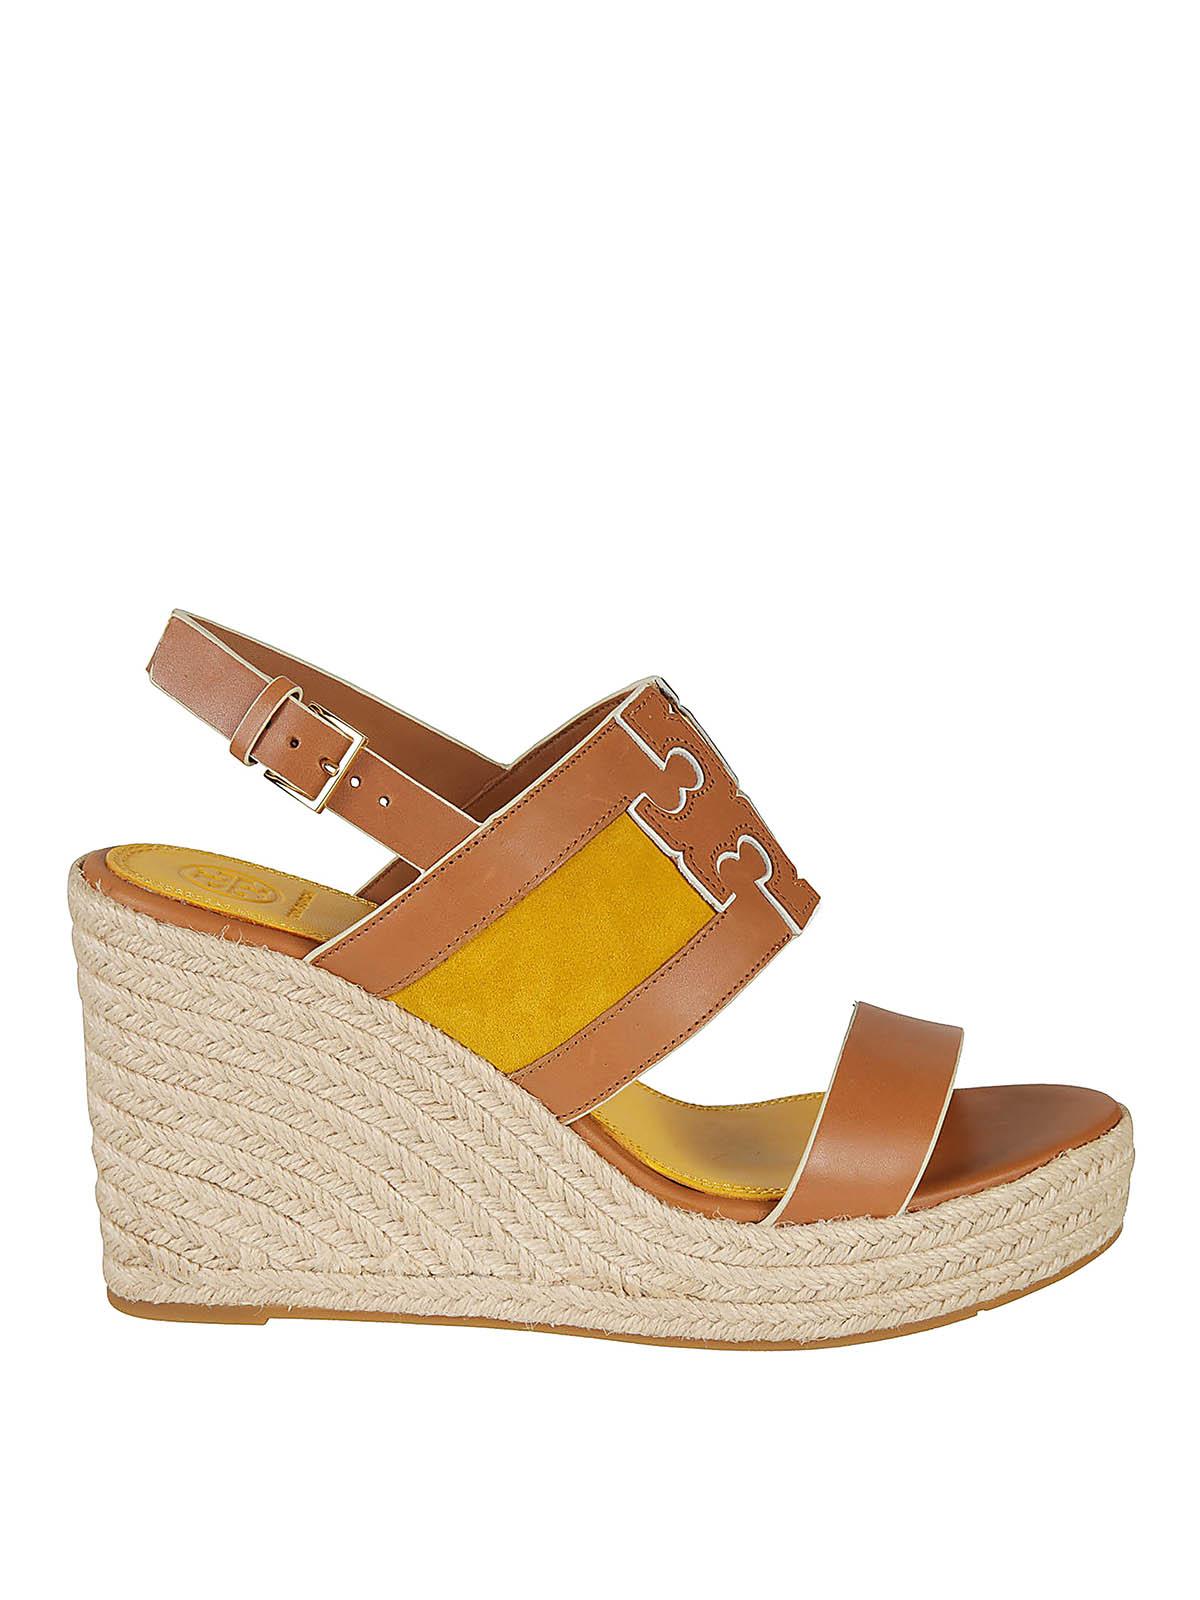 Tory Burch Suede Ines Wedge Espadrille Sandals in Yellow - Lyst